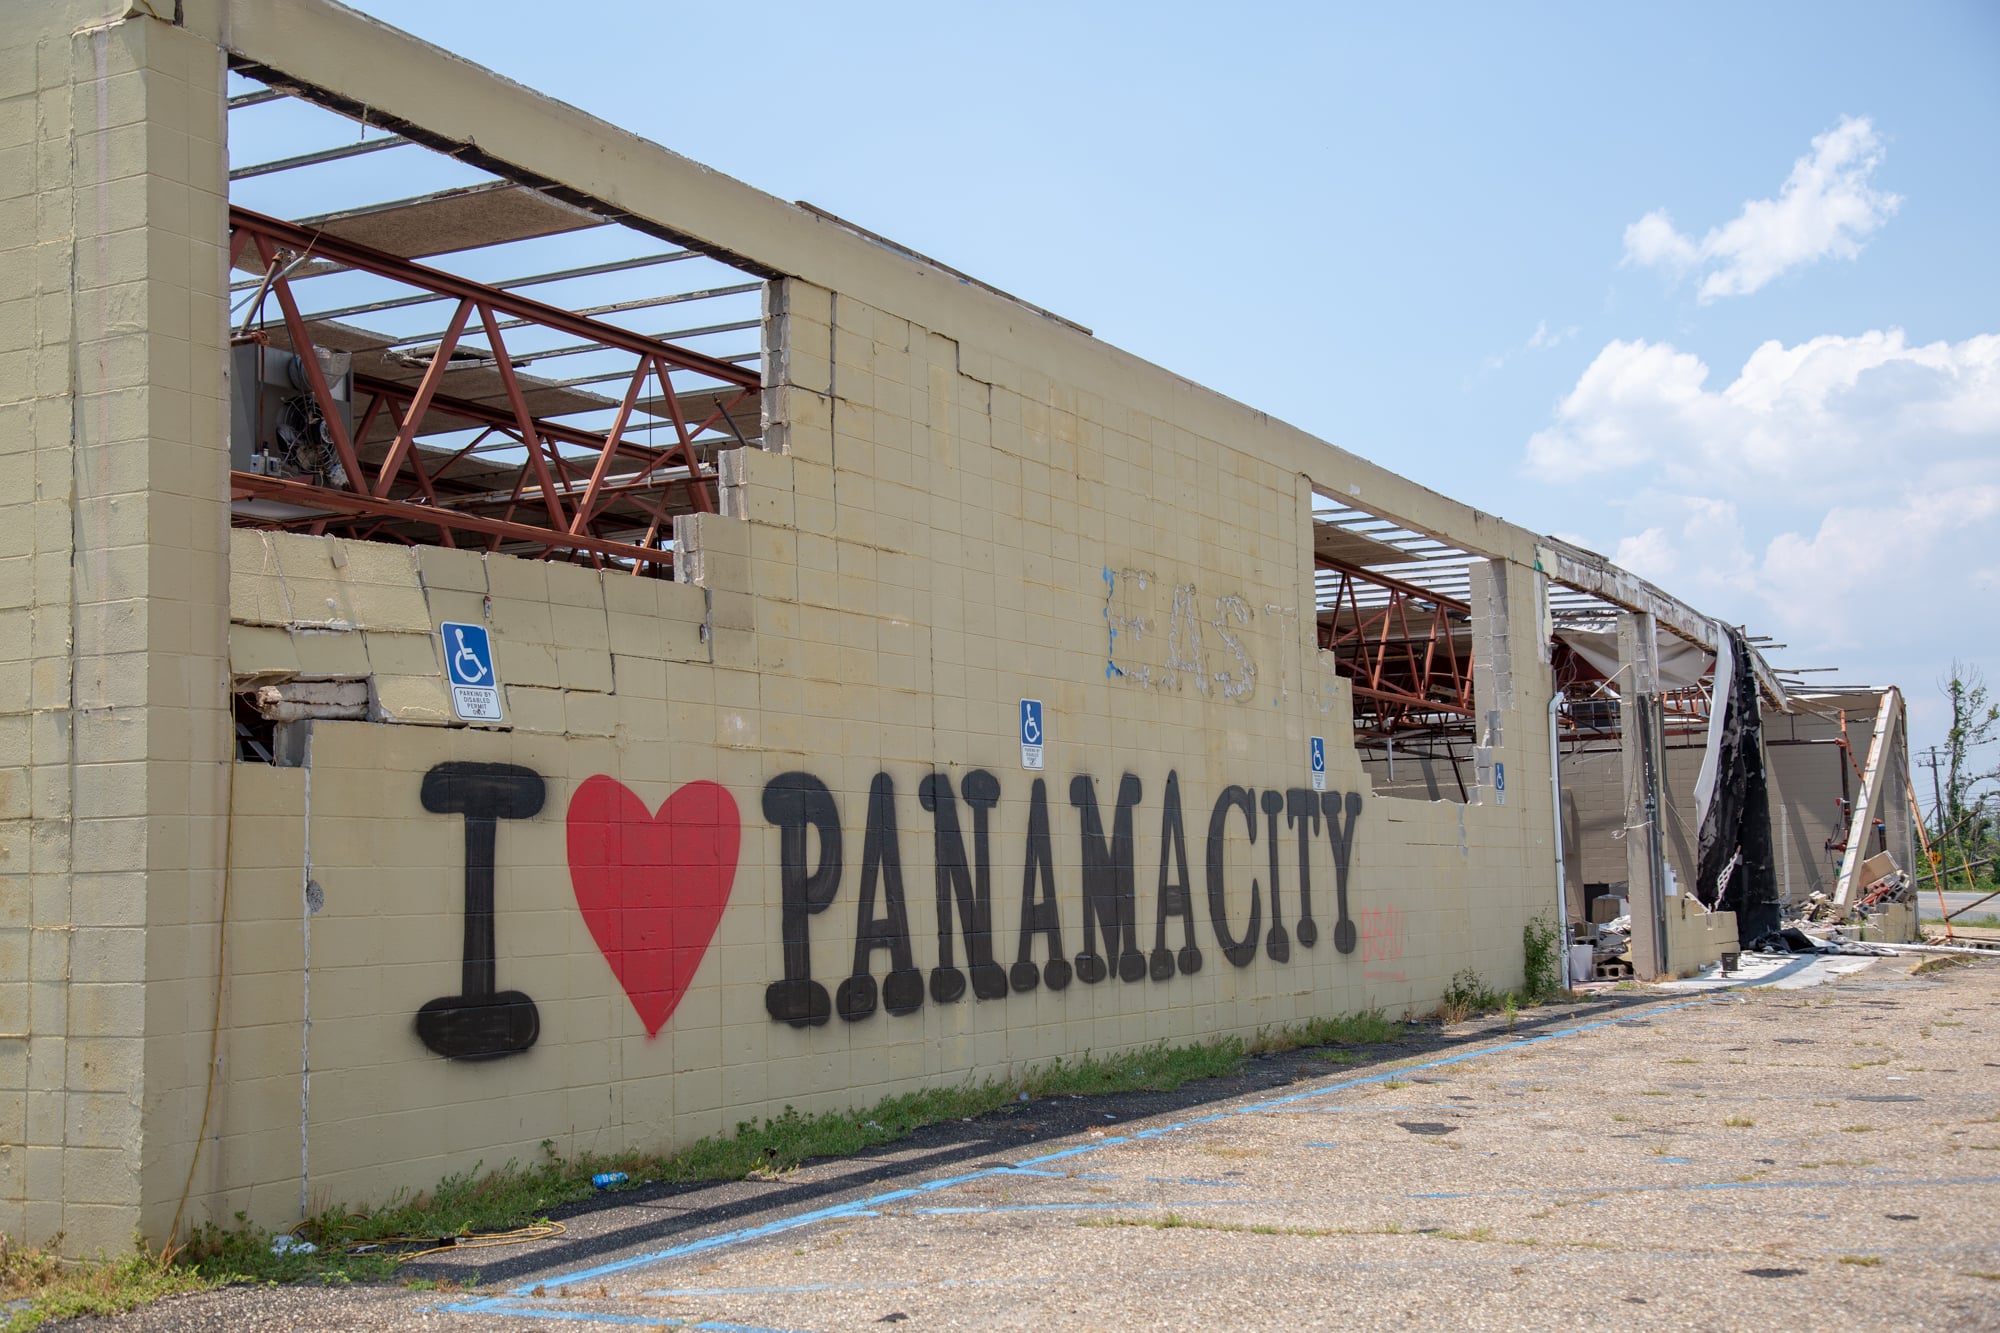 This graffiti on a destroyed building welcomes passerbys into Panama City, Florida. (Peter Nicieja/News21)